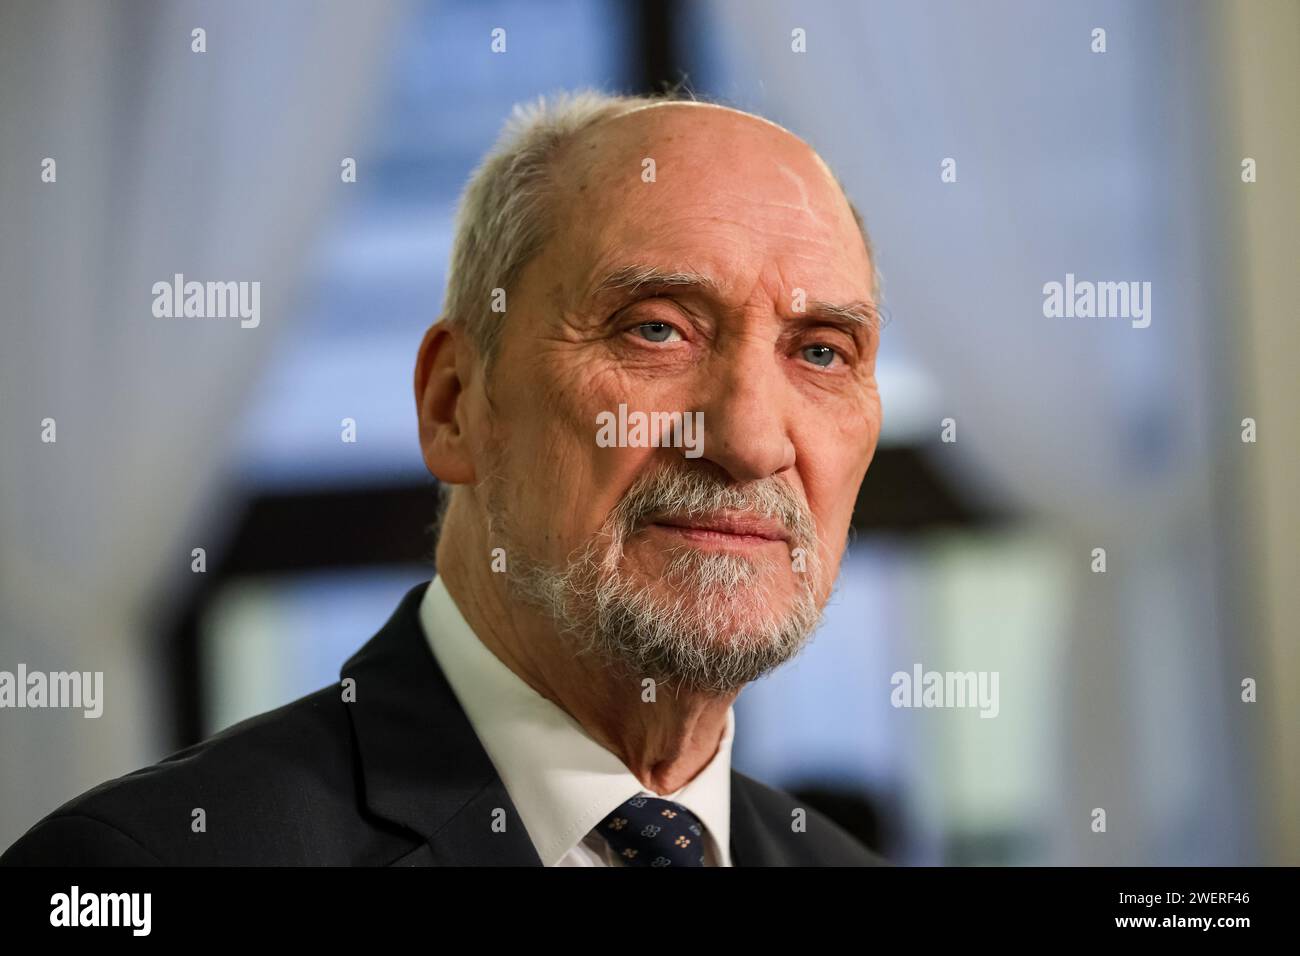 Warsaw, Poland, January 26, 2024. Antoni Macierewicz, former Minister of Defence of Poland talks to press during the 4th session of Polish Parliament that takes place amid chaos created by legal disagreement with the previous government. Current government took over the power in Poland on December 13 2023, taking over from the Law and Justice far-right political party, which has ruled for 8 years. Both sides accuse each other of unconstitutional acts, and two de facto legal systems are present in the country. Credit: Dominika Zarzycka/ Alamy Live News Stock Photo